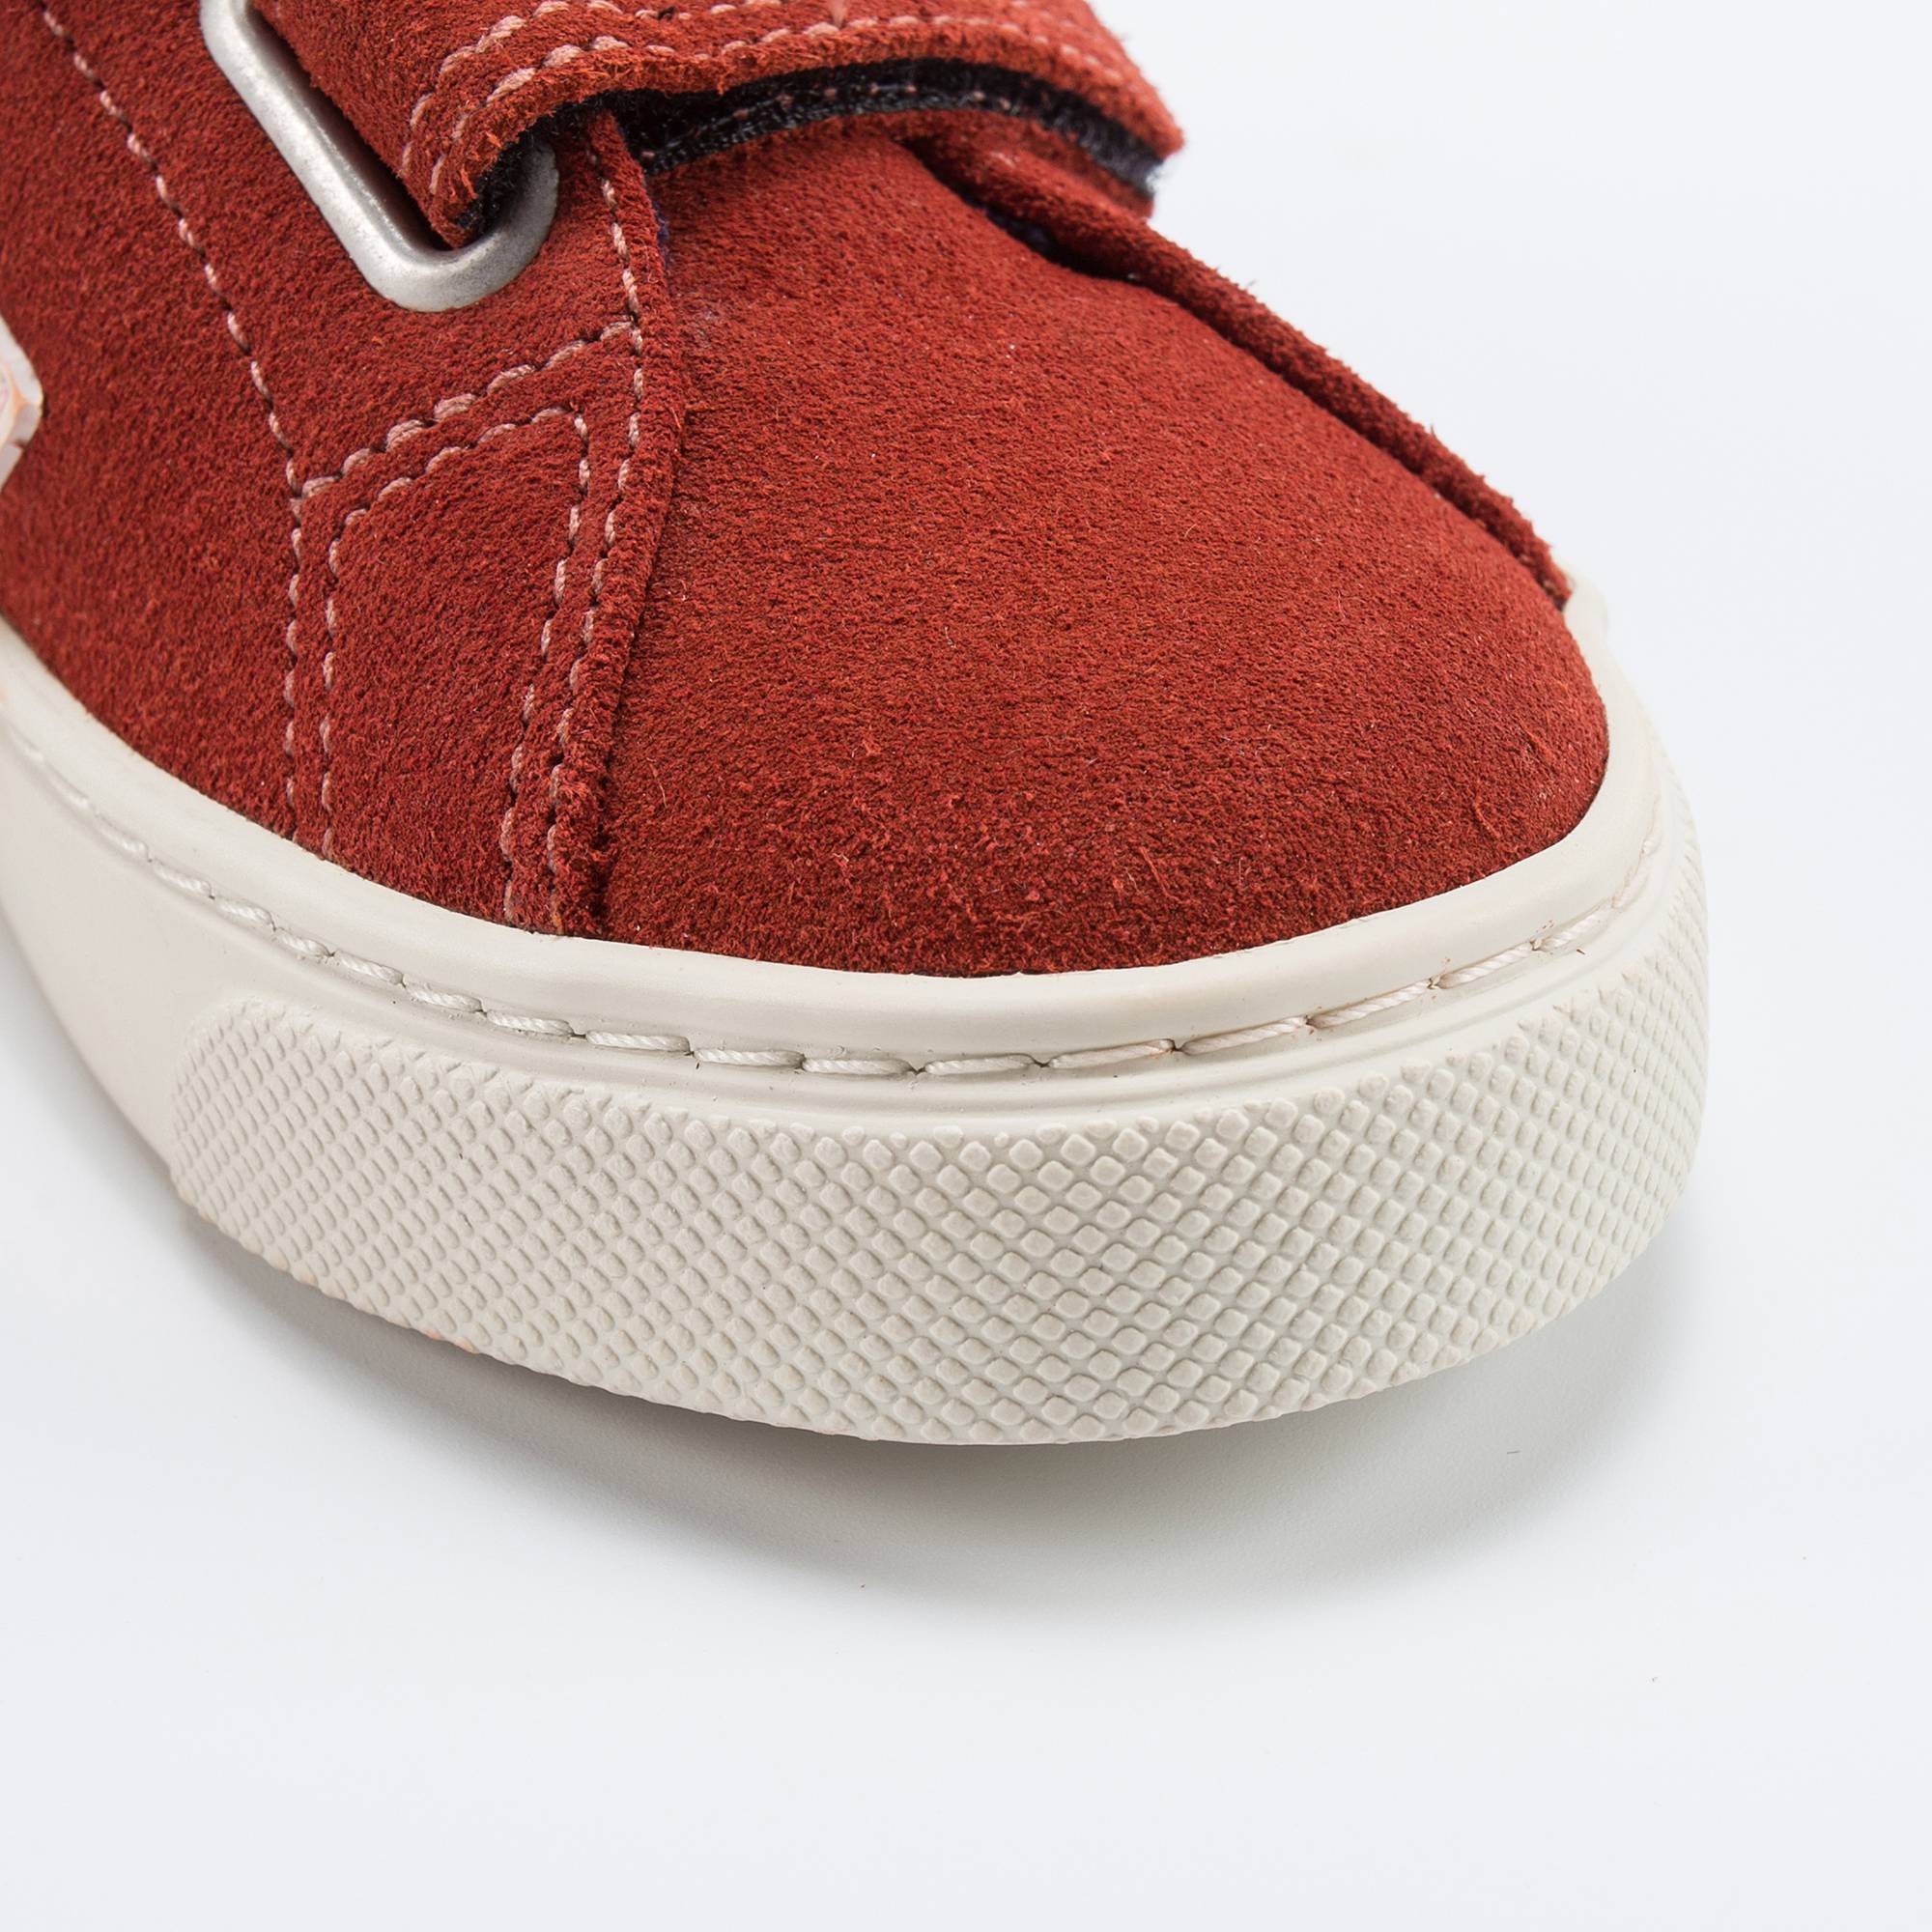 Girls & Boys Red Leather Velcro With White "V" Shoes